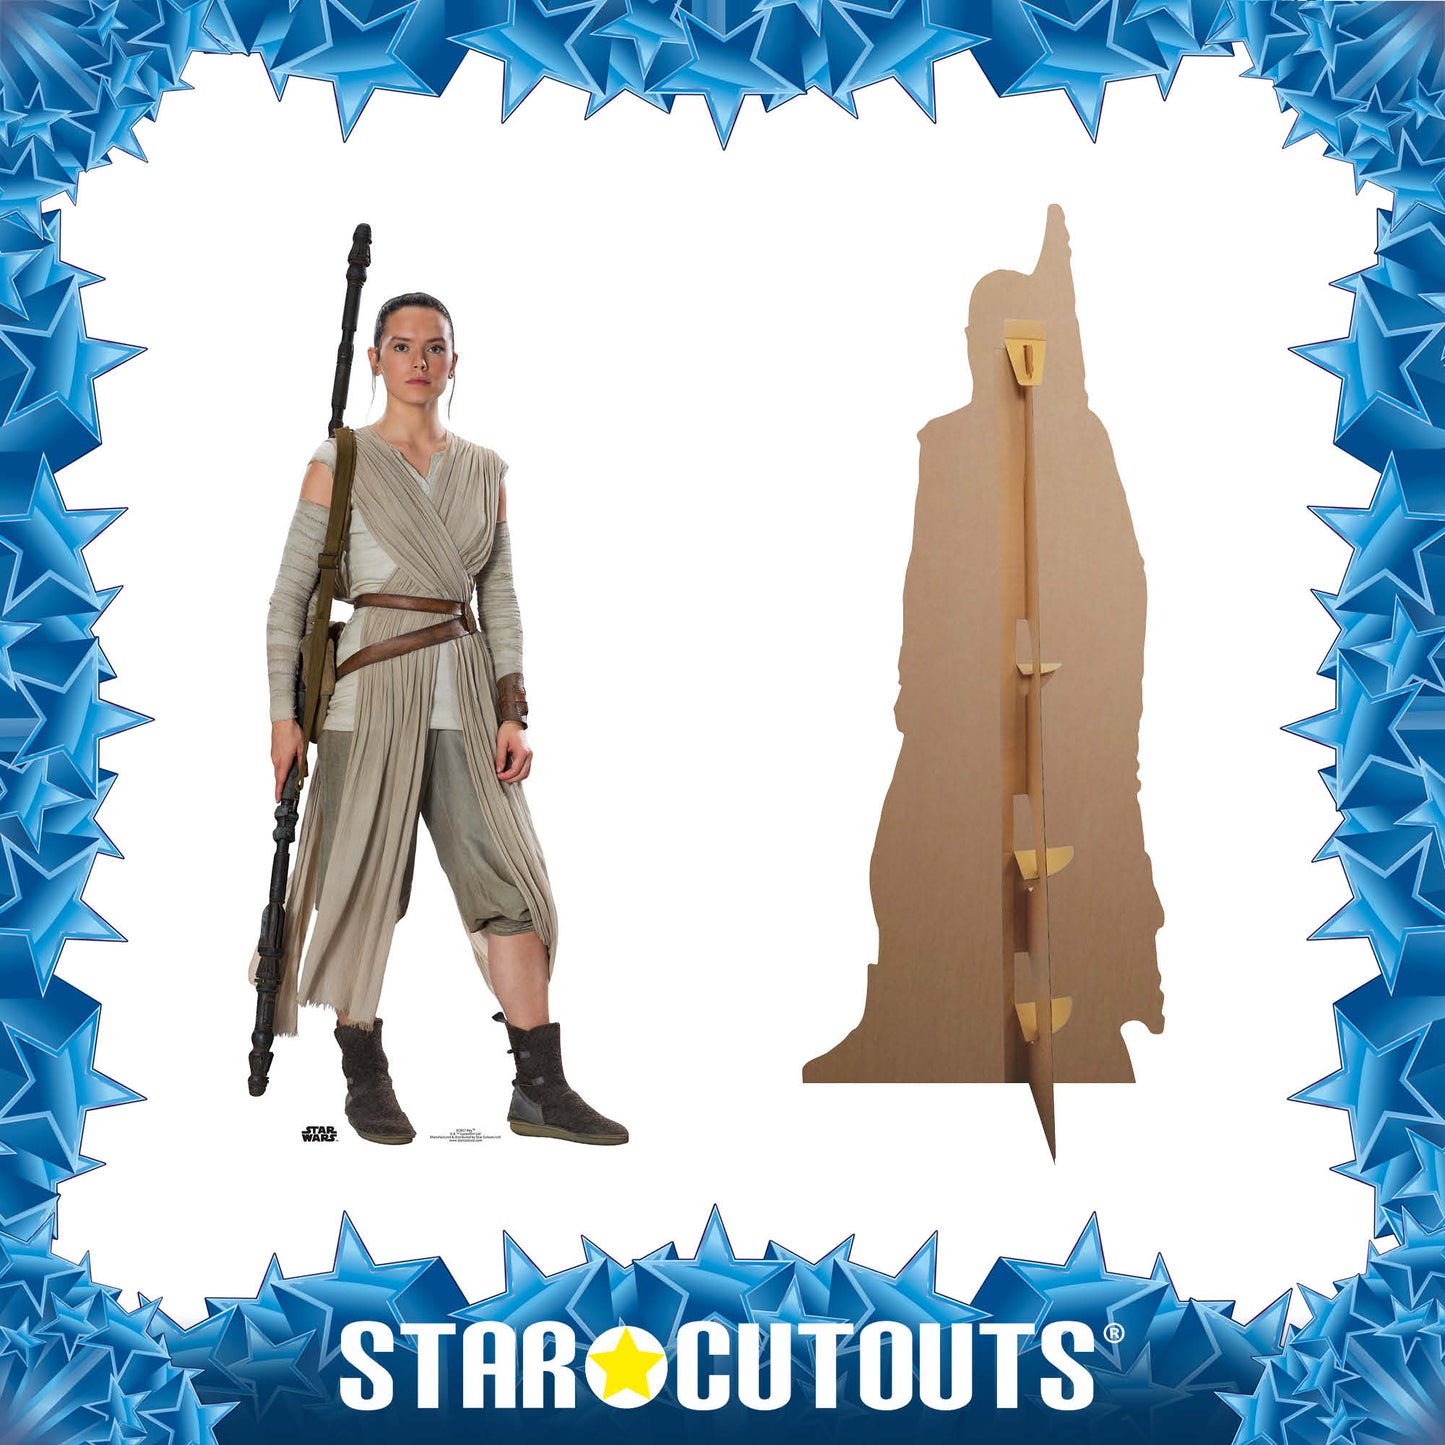 Rey Star Wars The Force Awakens Cardboard Cut Out Height 188cm